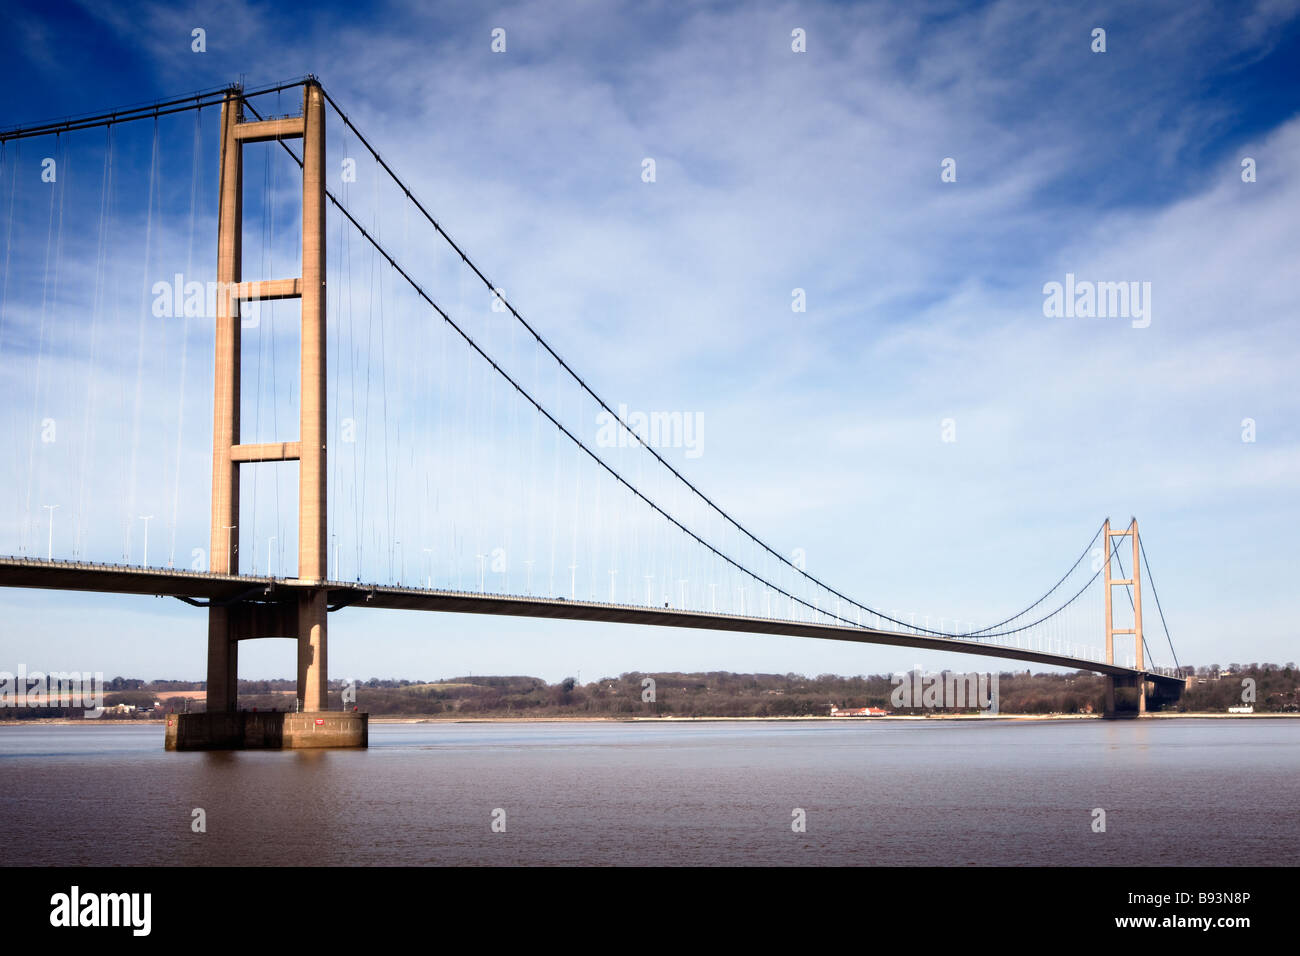 The Humber Bridge over the River Humber near Hull,Yorkshire, England, UK looking north Stock Photo